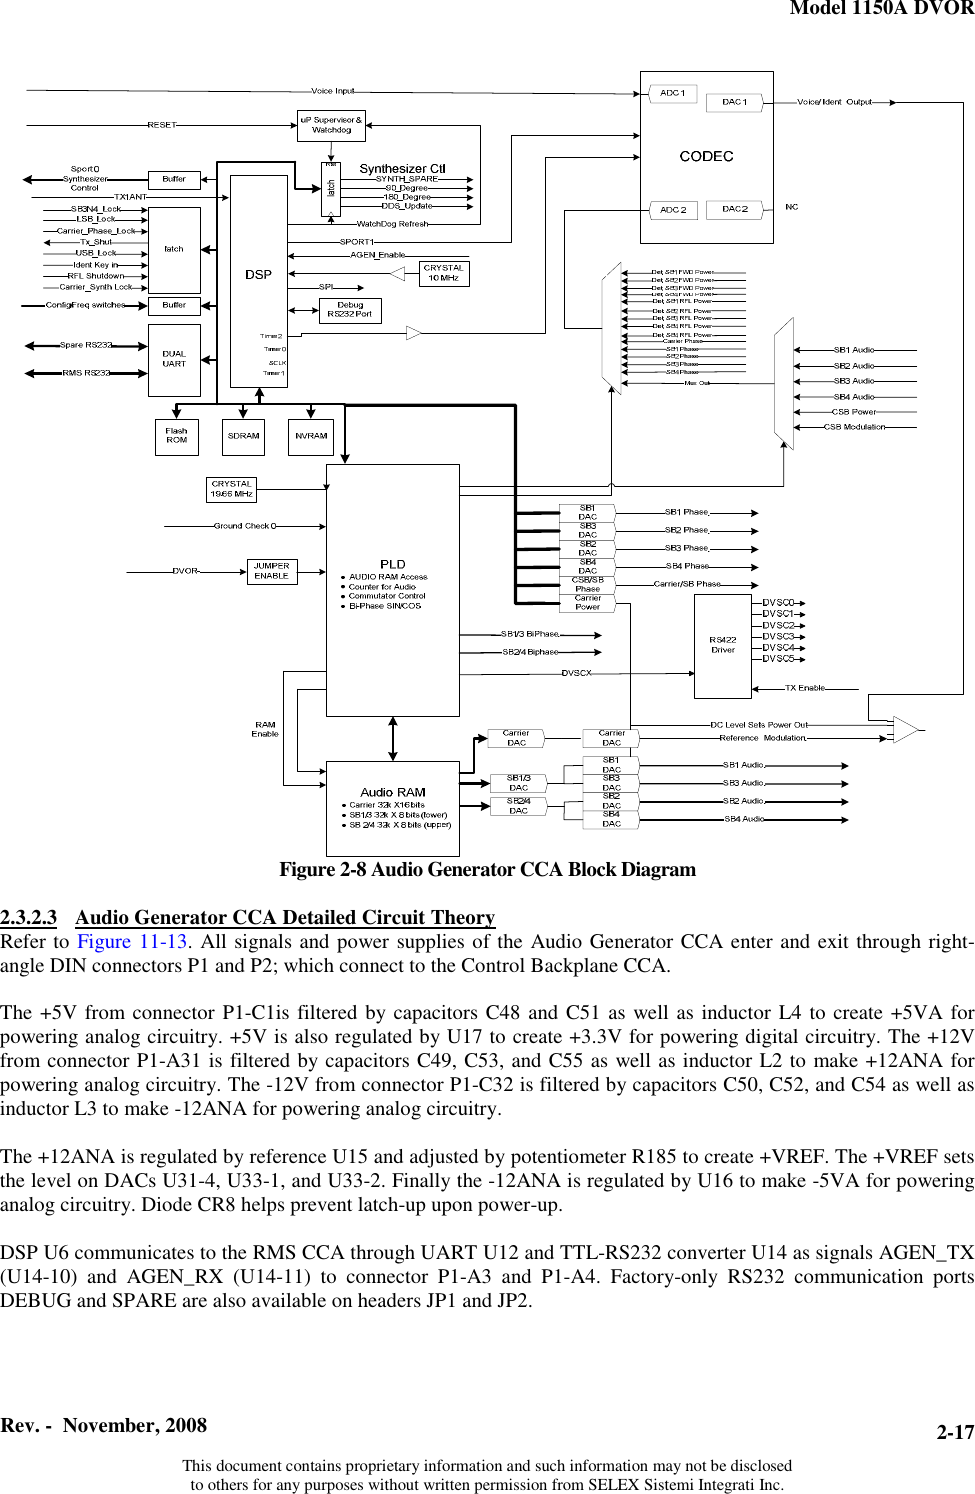 Model 1150A DVOR  Rev. -  November, 2008   This document contains proprietary information and such information may not be disclosed to others for any purposes without written permission from SELEX Sistemi Integrati Inc. 2-17Figure 2-8 Audio Generator CCA Block Diagram  2.3.2.3 Audio Generator CCA Detailed Circuit TheoryRefer to Figure 11-13.All signals and power supplies of the Audio Generator CCA enter and exit through right-angle DIN connectors P1 and P2; which connect to the Control Backplane CCA.   The +5V from connector P1-C1is filtered by capacitors C48 and C51 as well as inductor L4 to create +5VA for powering analog circuitry. +5V is also regulated by U17 to create +3.3V for powering digital circuitry. The +12V from connector P1-A31 is filtered by capacitors C49, C53, and C55 as well as inductor L2 to make +12ANA for powering analog circuitry. The -12V from connector P1-C32 is filtered by capacitors C50, C52, and C54 as well as inductor L3 to make -12ANA for powering analog circuitry.  The +12ANA is regulated by reference U15 and adjusted by potentiometer R185 to create +VREF. The +VREF sets the level on DACs U31-4, U33-1, and U33-2. Finally the -12ANA is regulated by U16 to make -5VA for powering analog circuitry. Diode CR8 helps prevent latch-up upon power-up.  DSP U6 communicates to the RMS CCA through UART U12 and TTL-RS232 converter U14 as signals AGEN_TX (U14-10) and AGEN_RX (U14-11) to connector P1-A3 and P1-A4. Factory-only RS232 communication ports DEBUG and SPARE are also available on headers JP1 and JP2.  